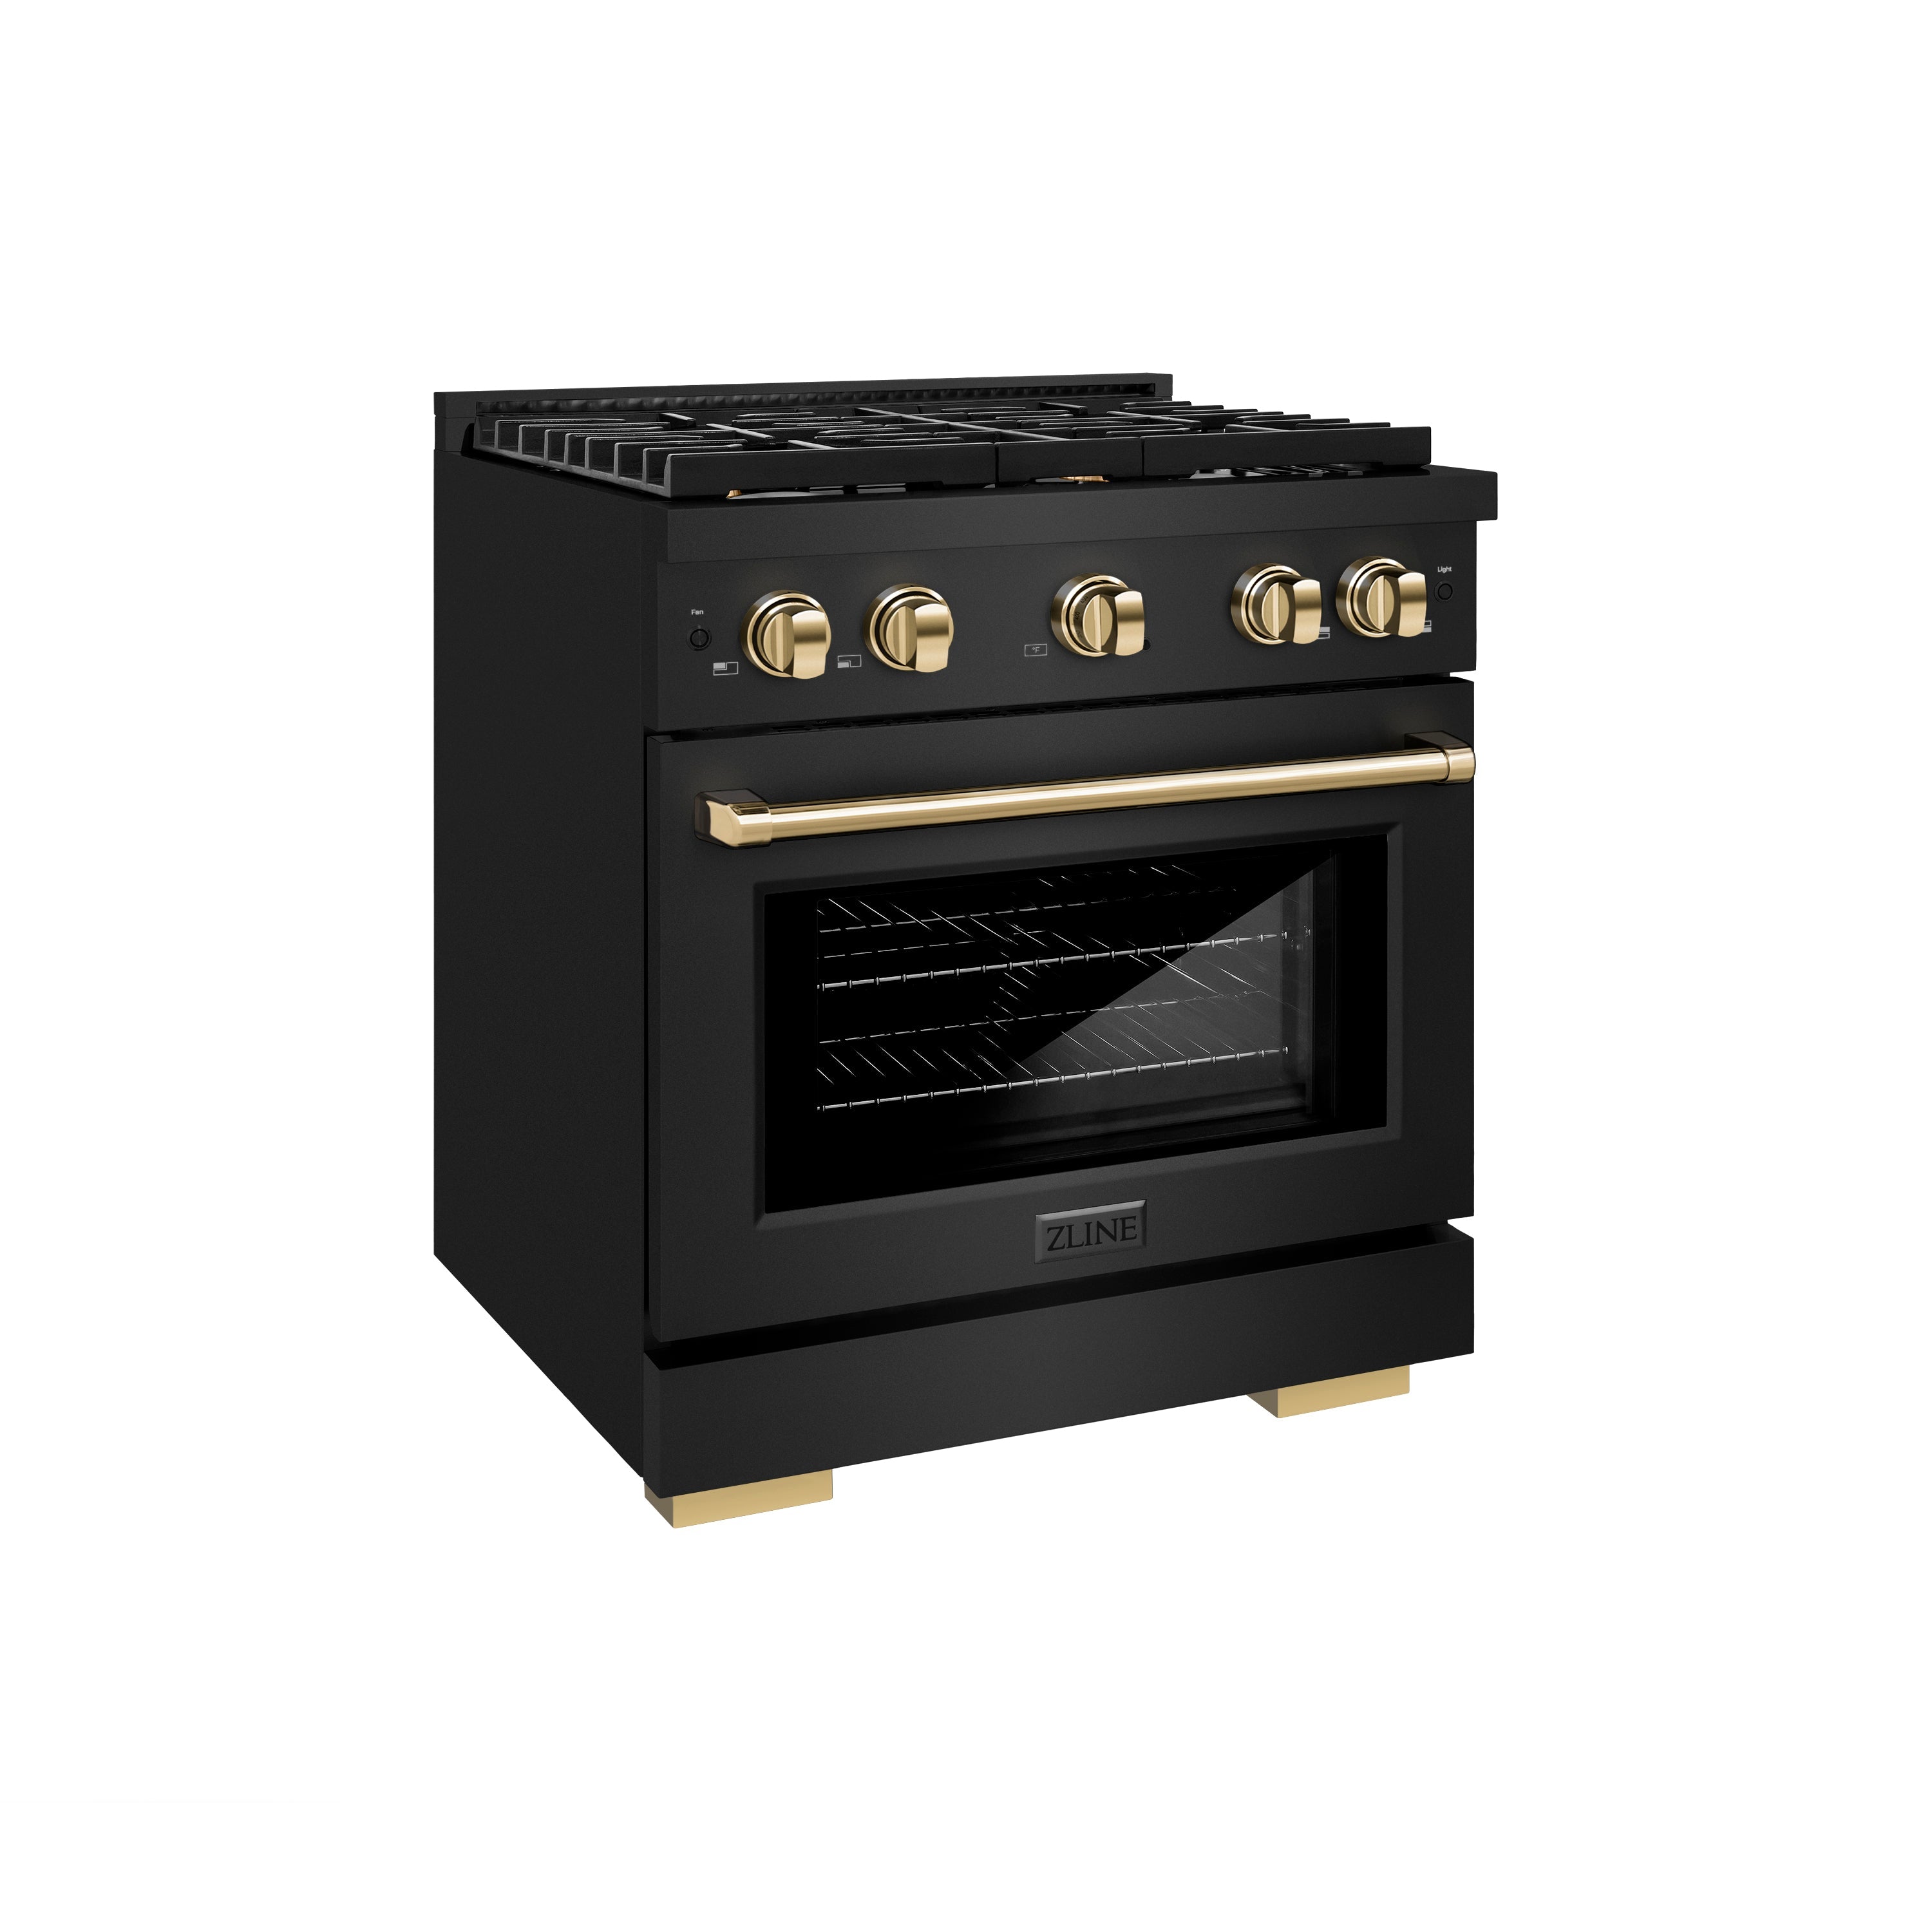 ZLINE Autograph Edition 30 in. 4.2 cu. ft. 4 Burner Gas Range with Convection Gas Oven in Black Stainless Steel and Polished Gold Accents (SGRBZ-30-G)